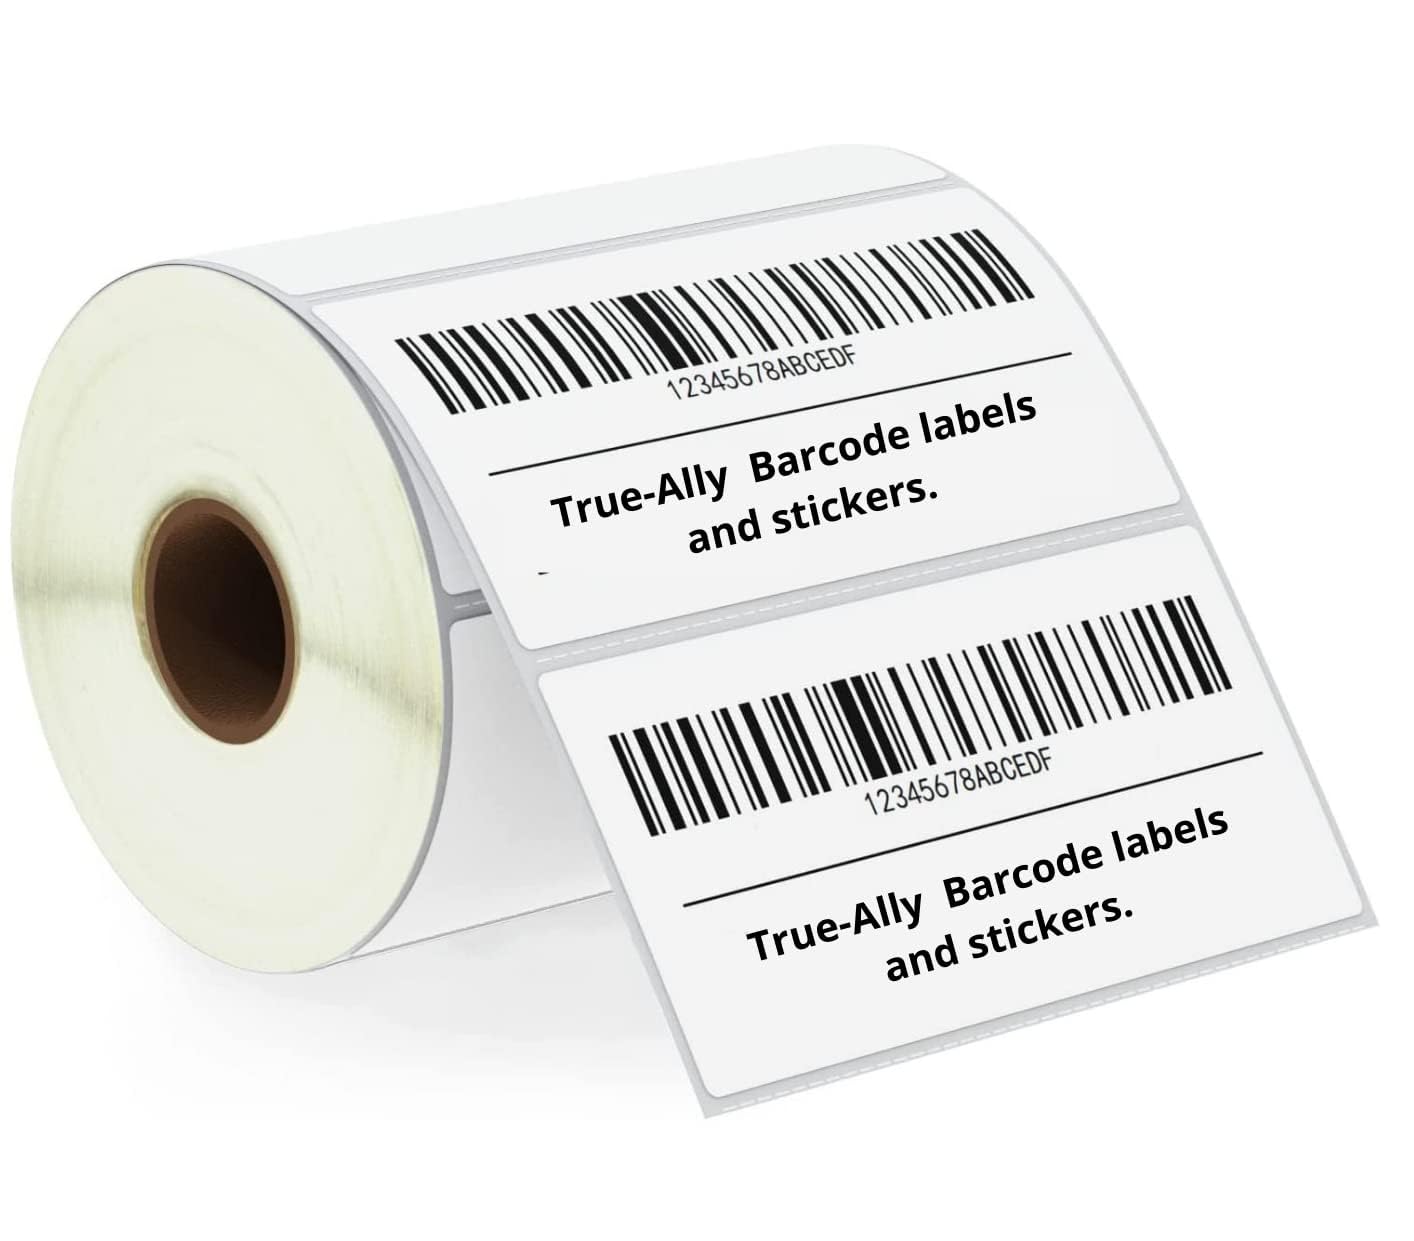 KIYA 100x50 Barcode Label Sticker  - 100mm x 50mm - 1 Ups - 1000 Labels Per Roll - White Self Adhesive Sticker for Printing Barcoding (1 Roll Per Pack (1000 Labels))